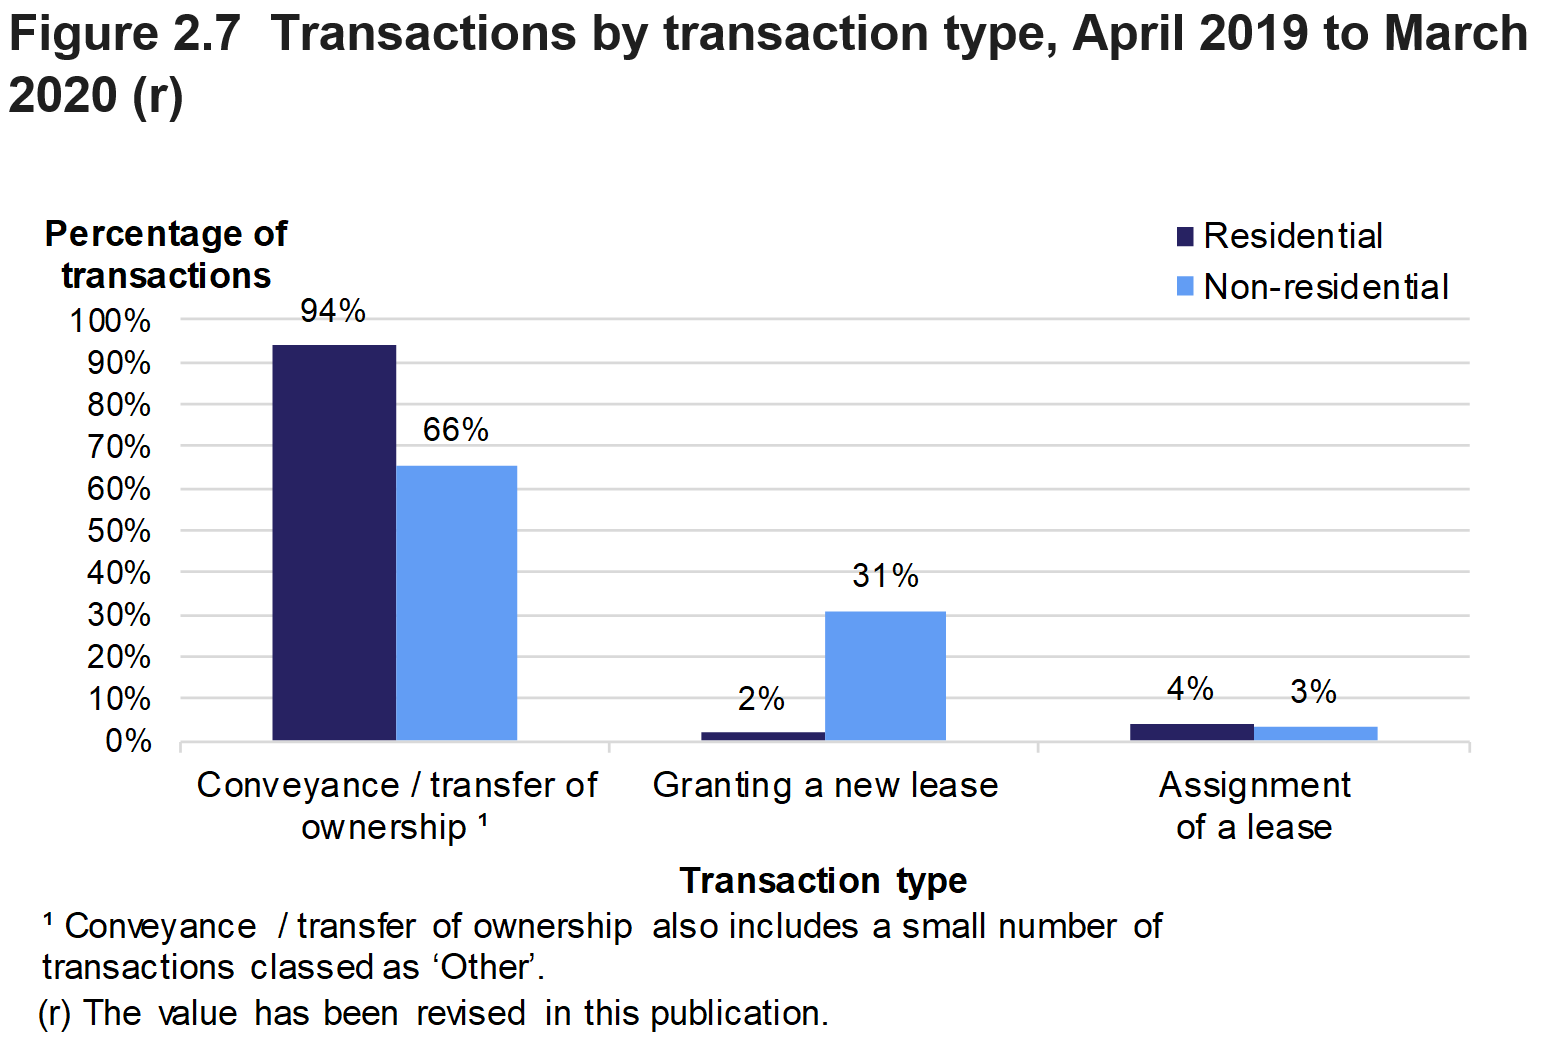 Figure 2.7 shows the percentage of transactions involving conveyance / transfer of ownership, granting of a new lease or assignment of a lease, for April 2019 to March 2020. Separate percentages are given for residential and non-residential transactions.